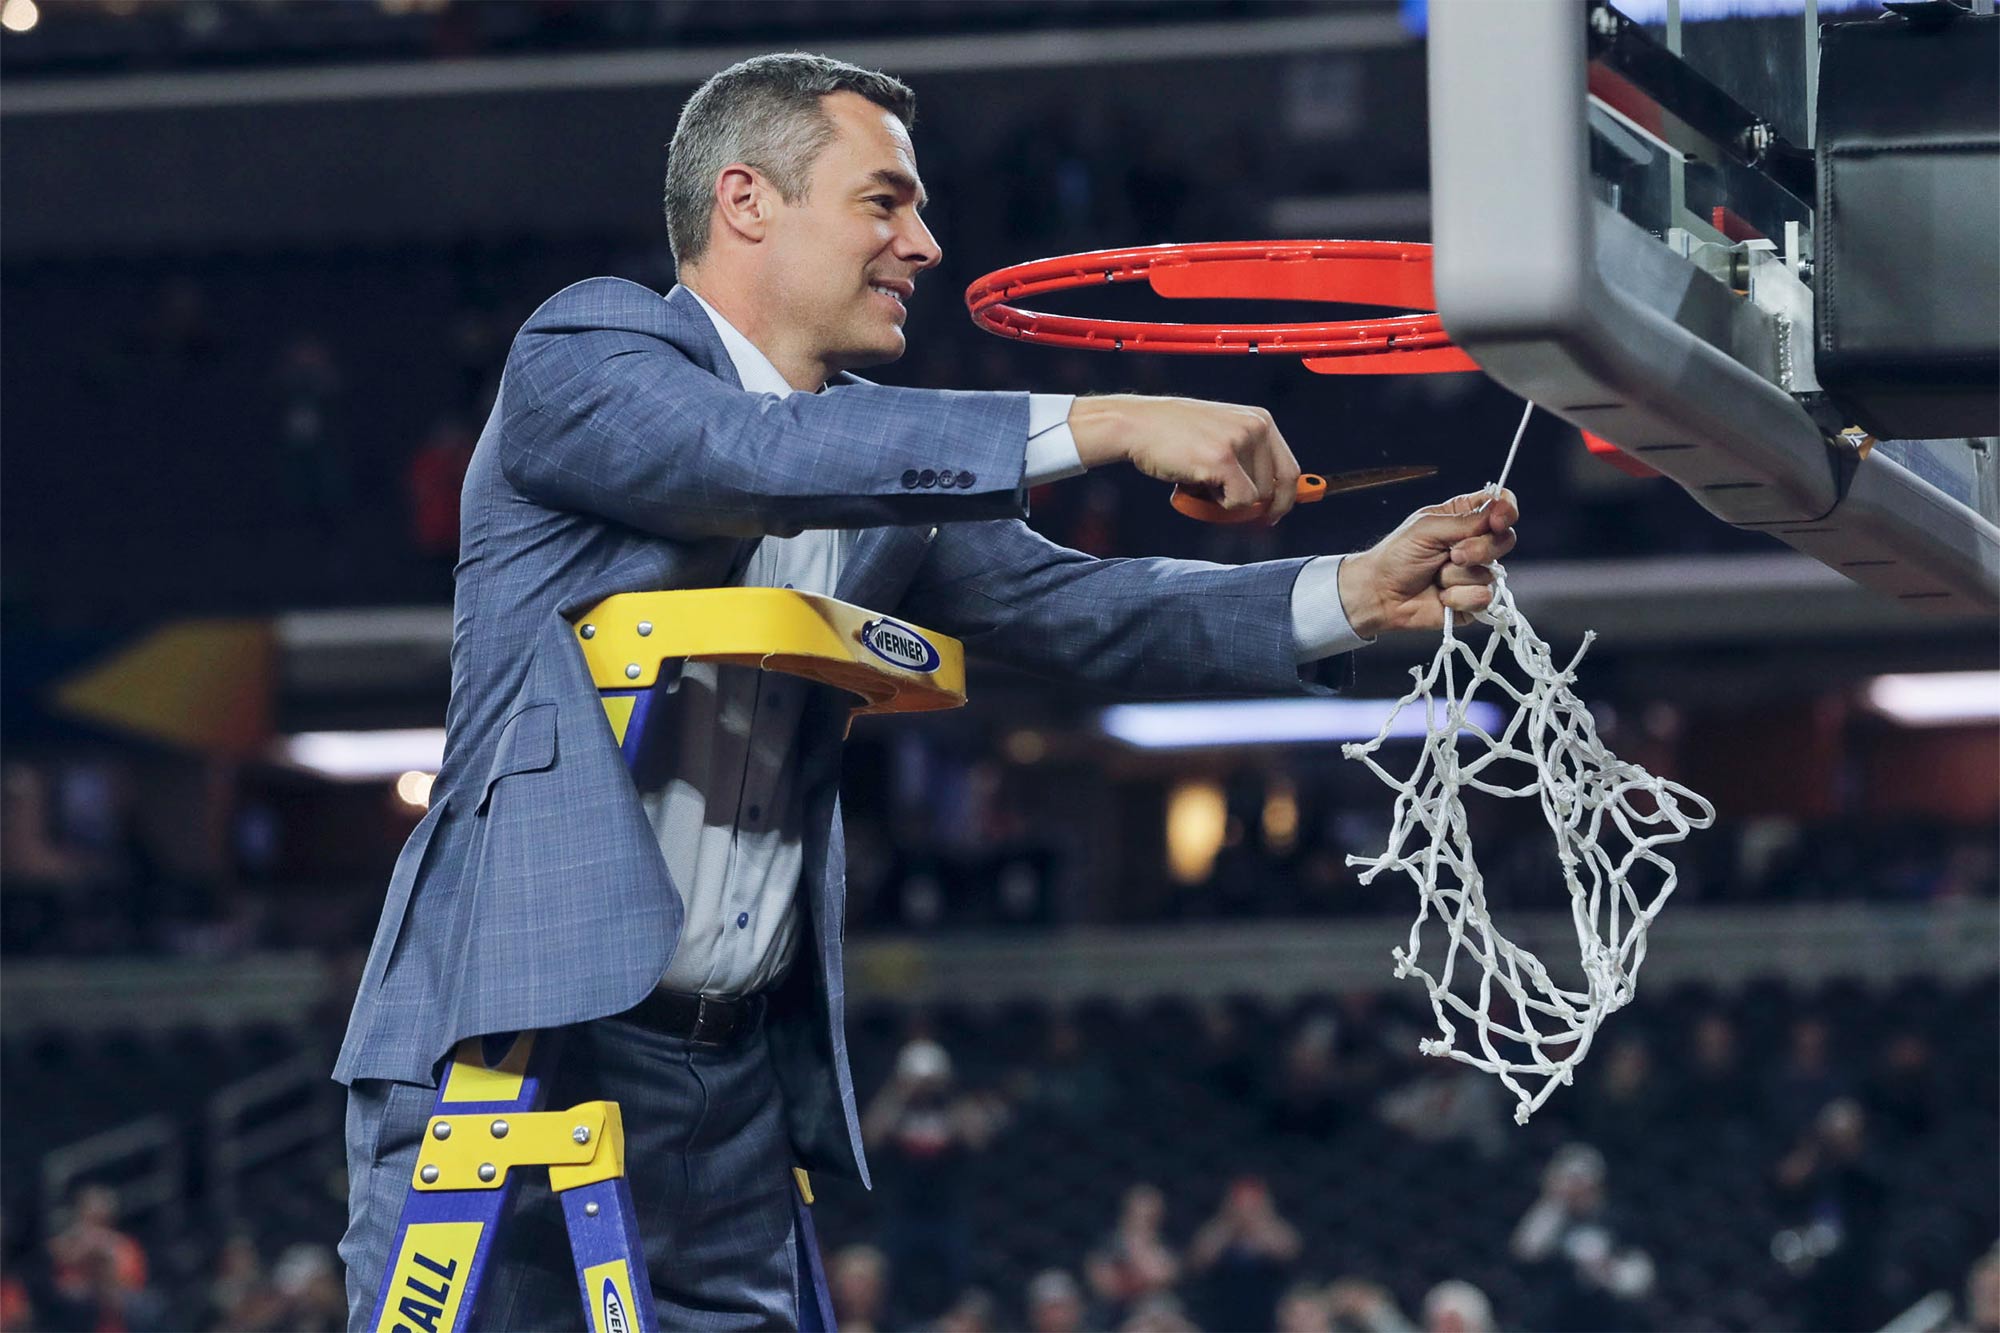 Tony Bennett stands on a ladder and cuts down the net from a basketball hoop